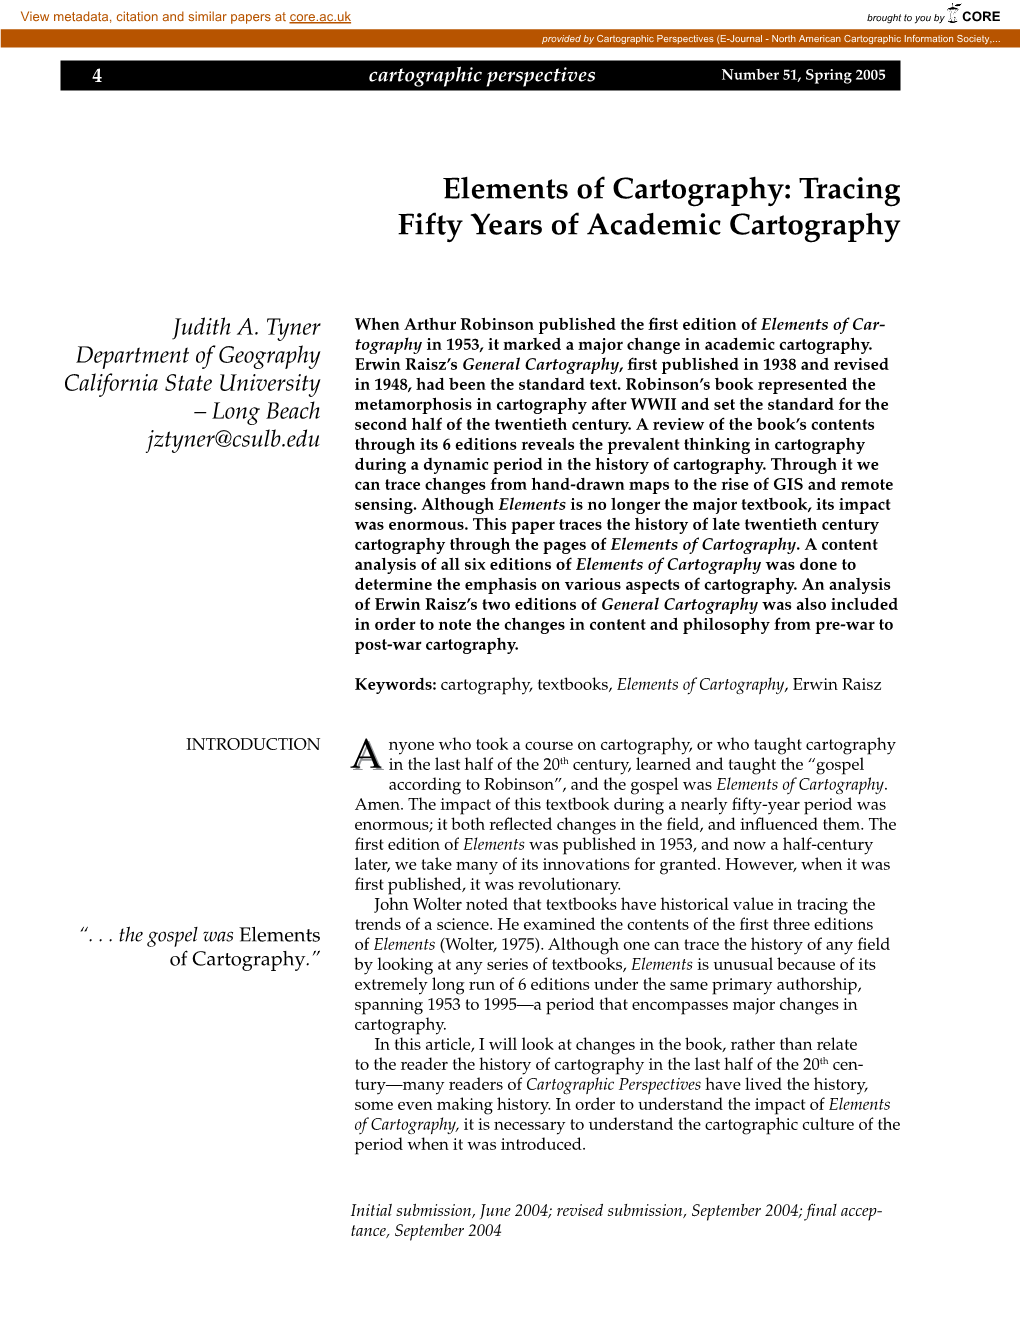 Elements of Cartography: Tracing Fifty Years of Academic Cartography